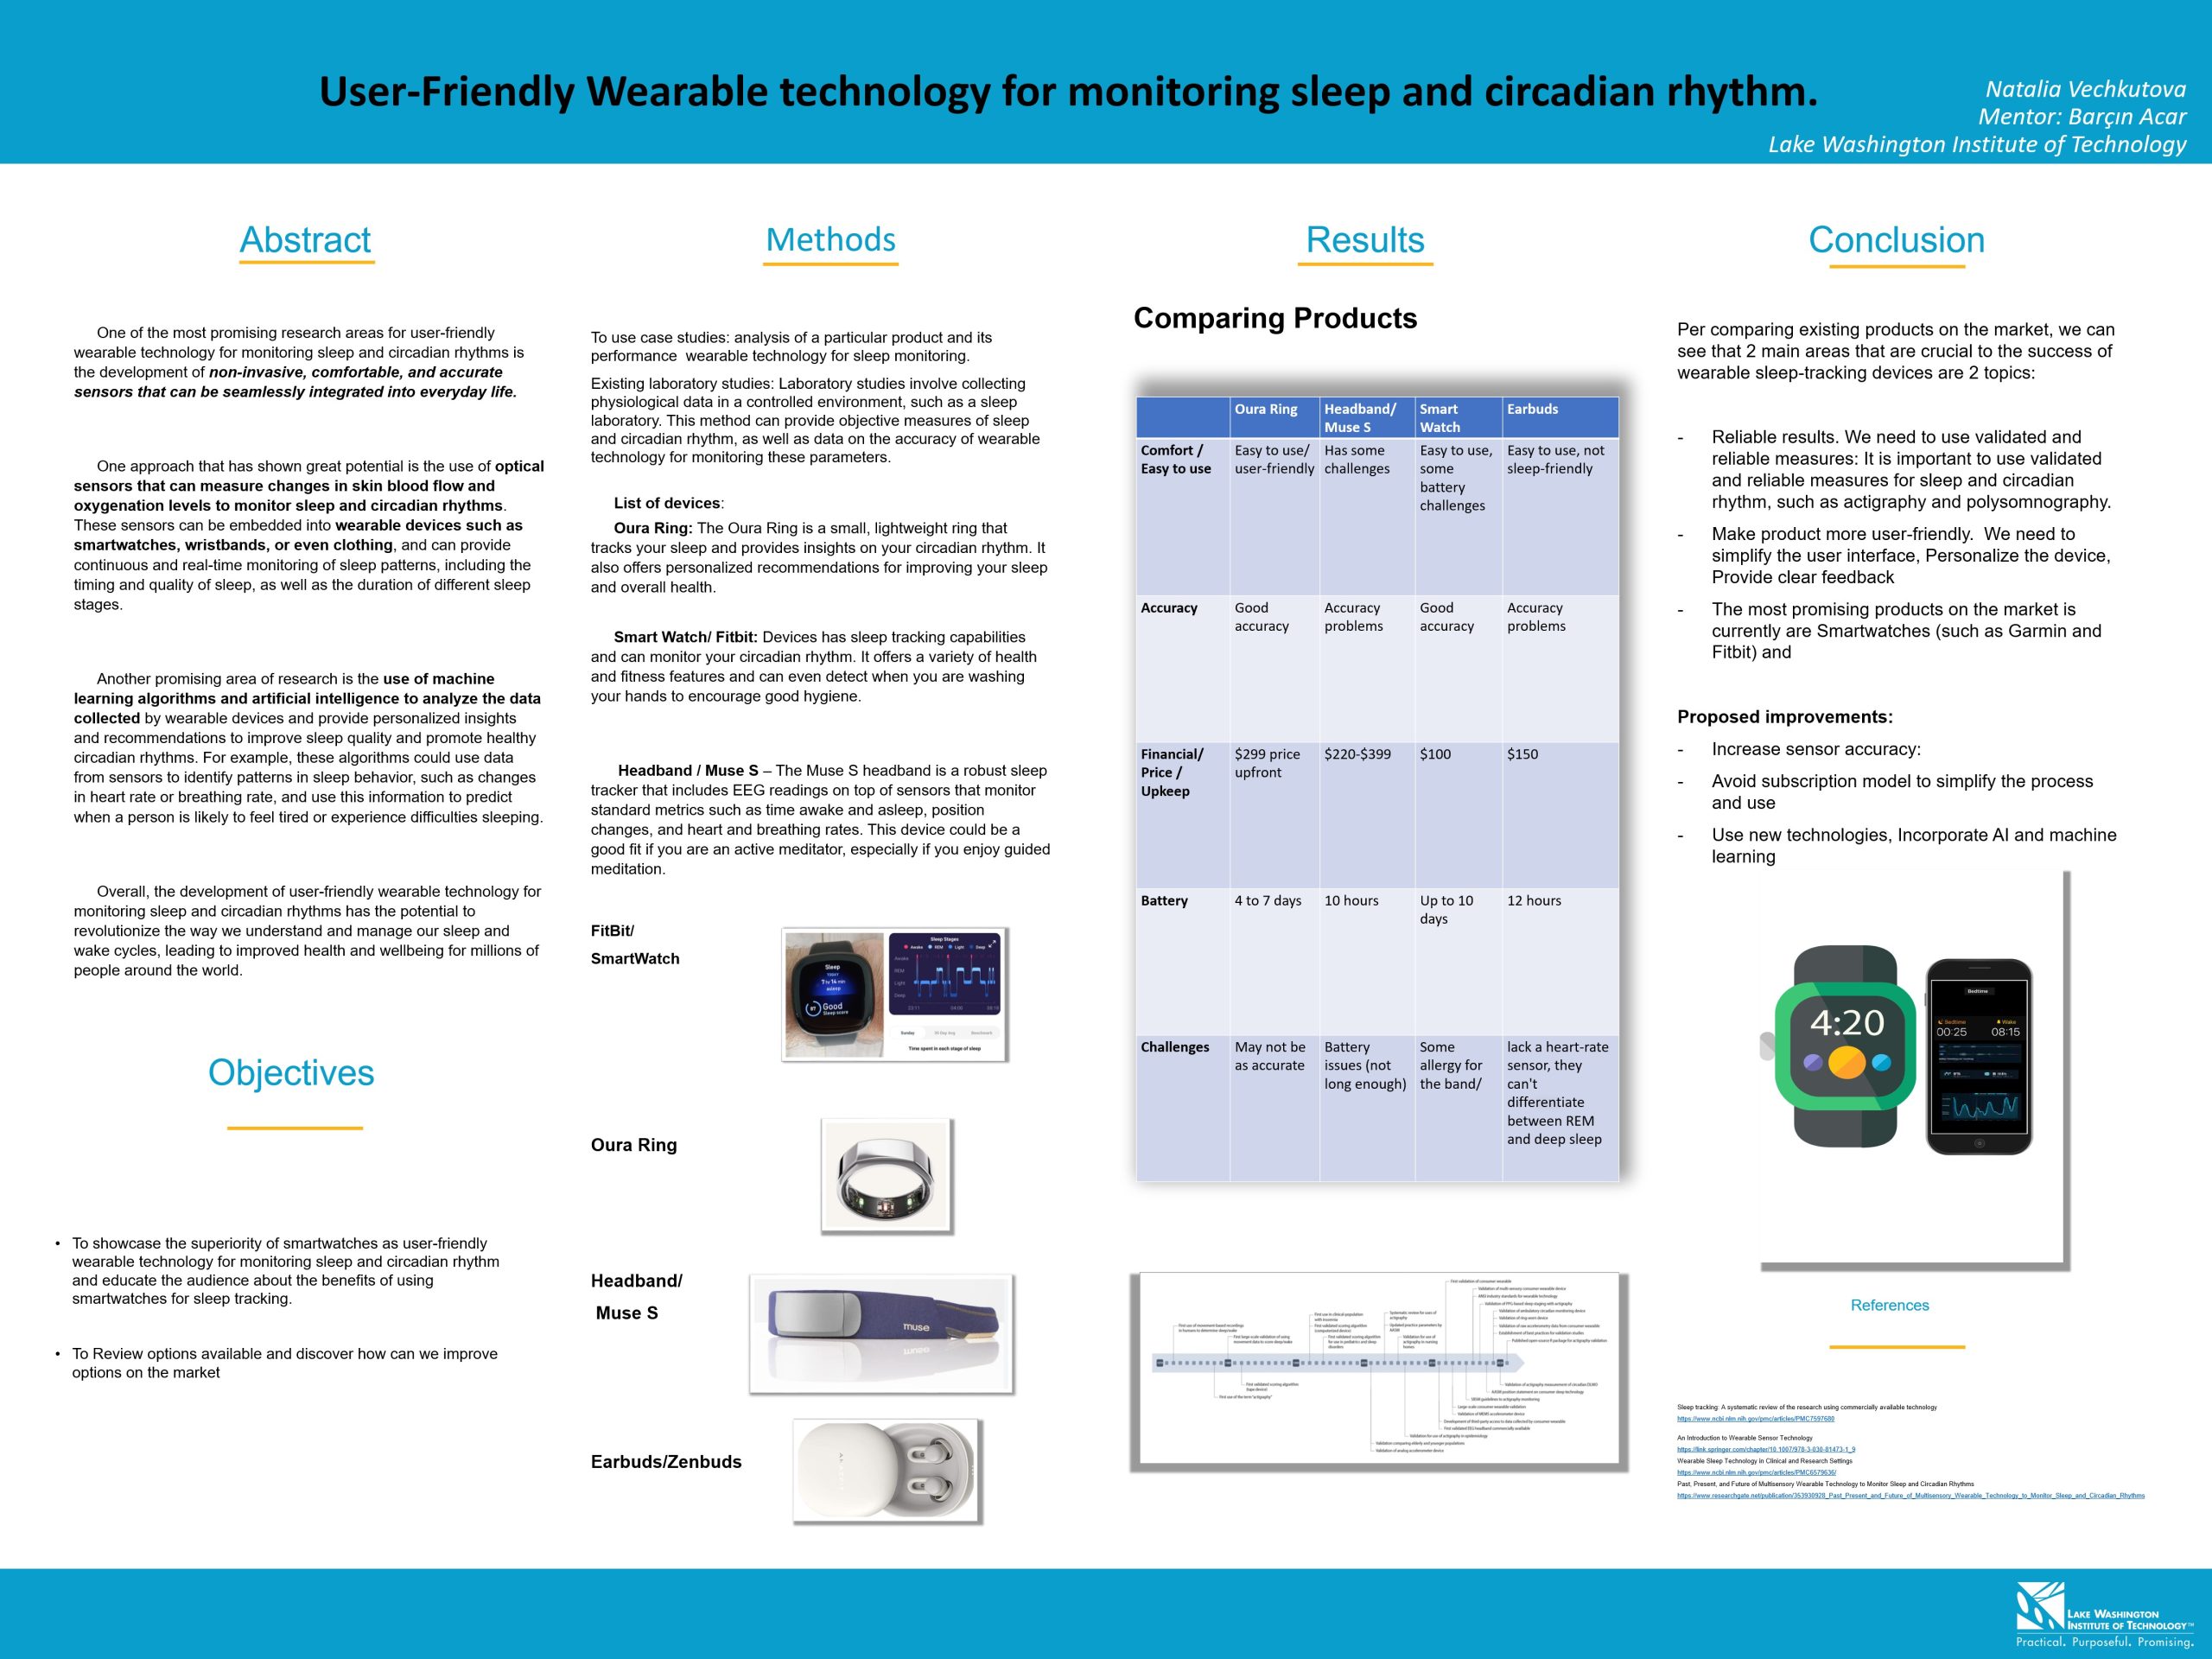 Research poster for study analyzing wearable technology devices for functionality including Oura ring, smart watch/Fitbit, and headband/Muse S